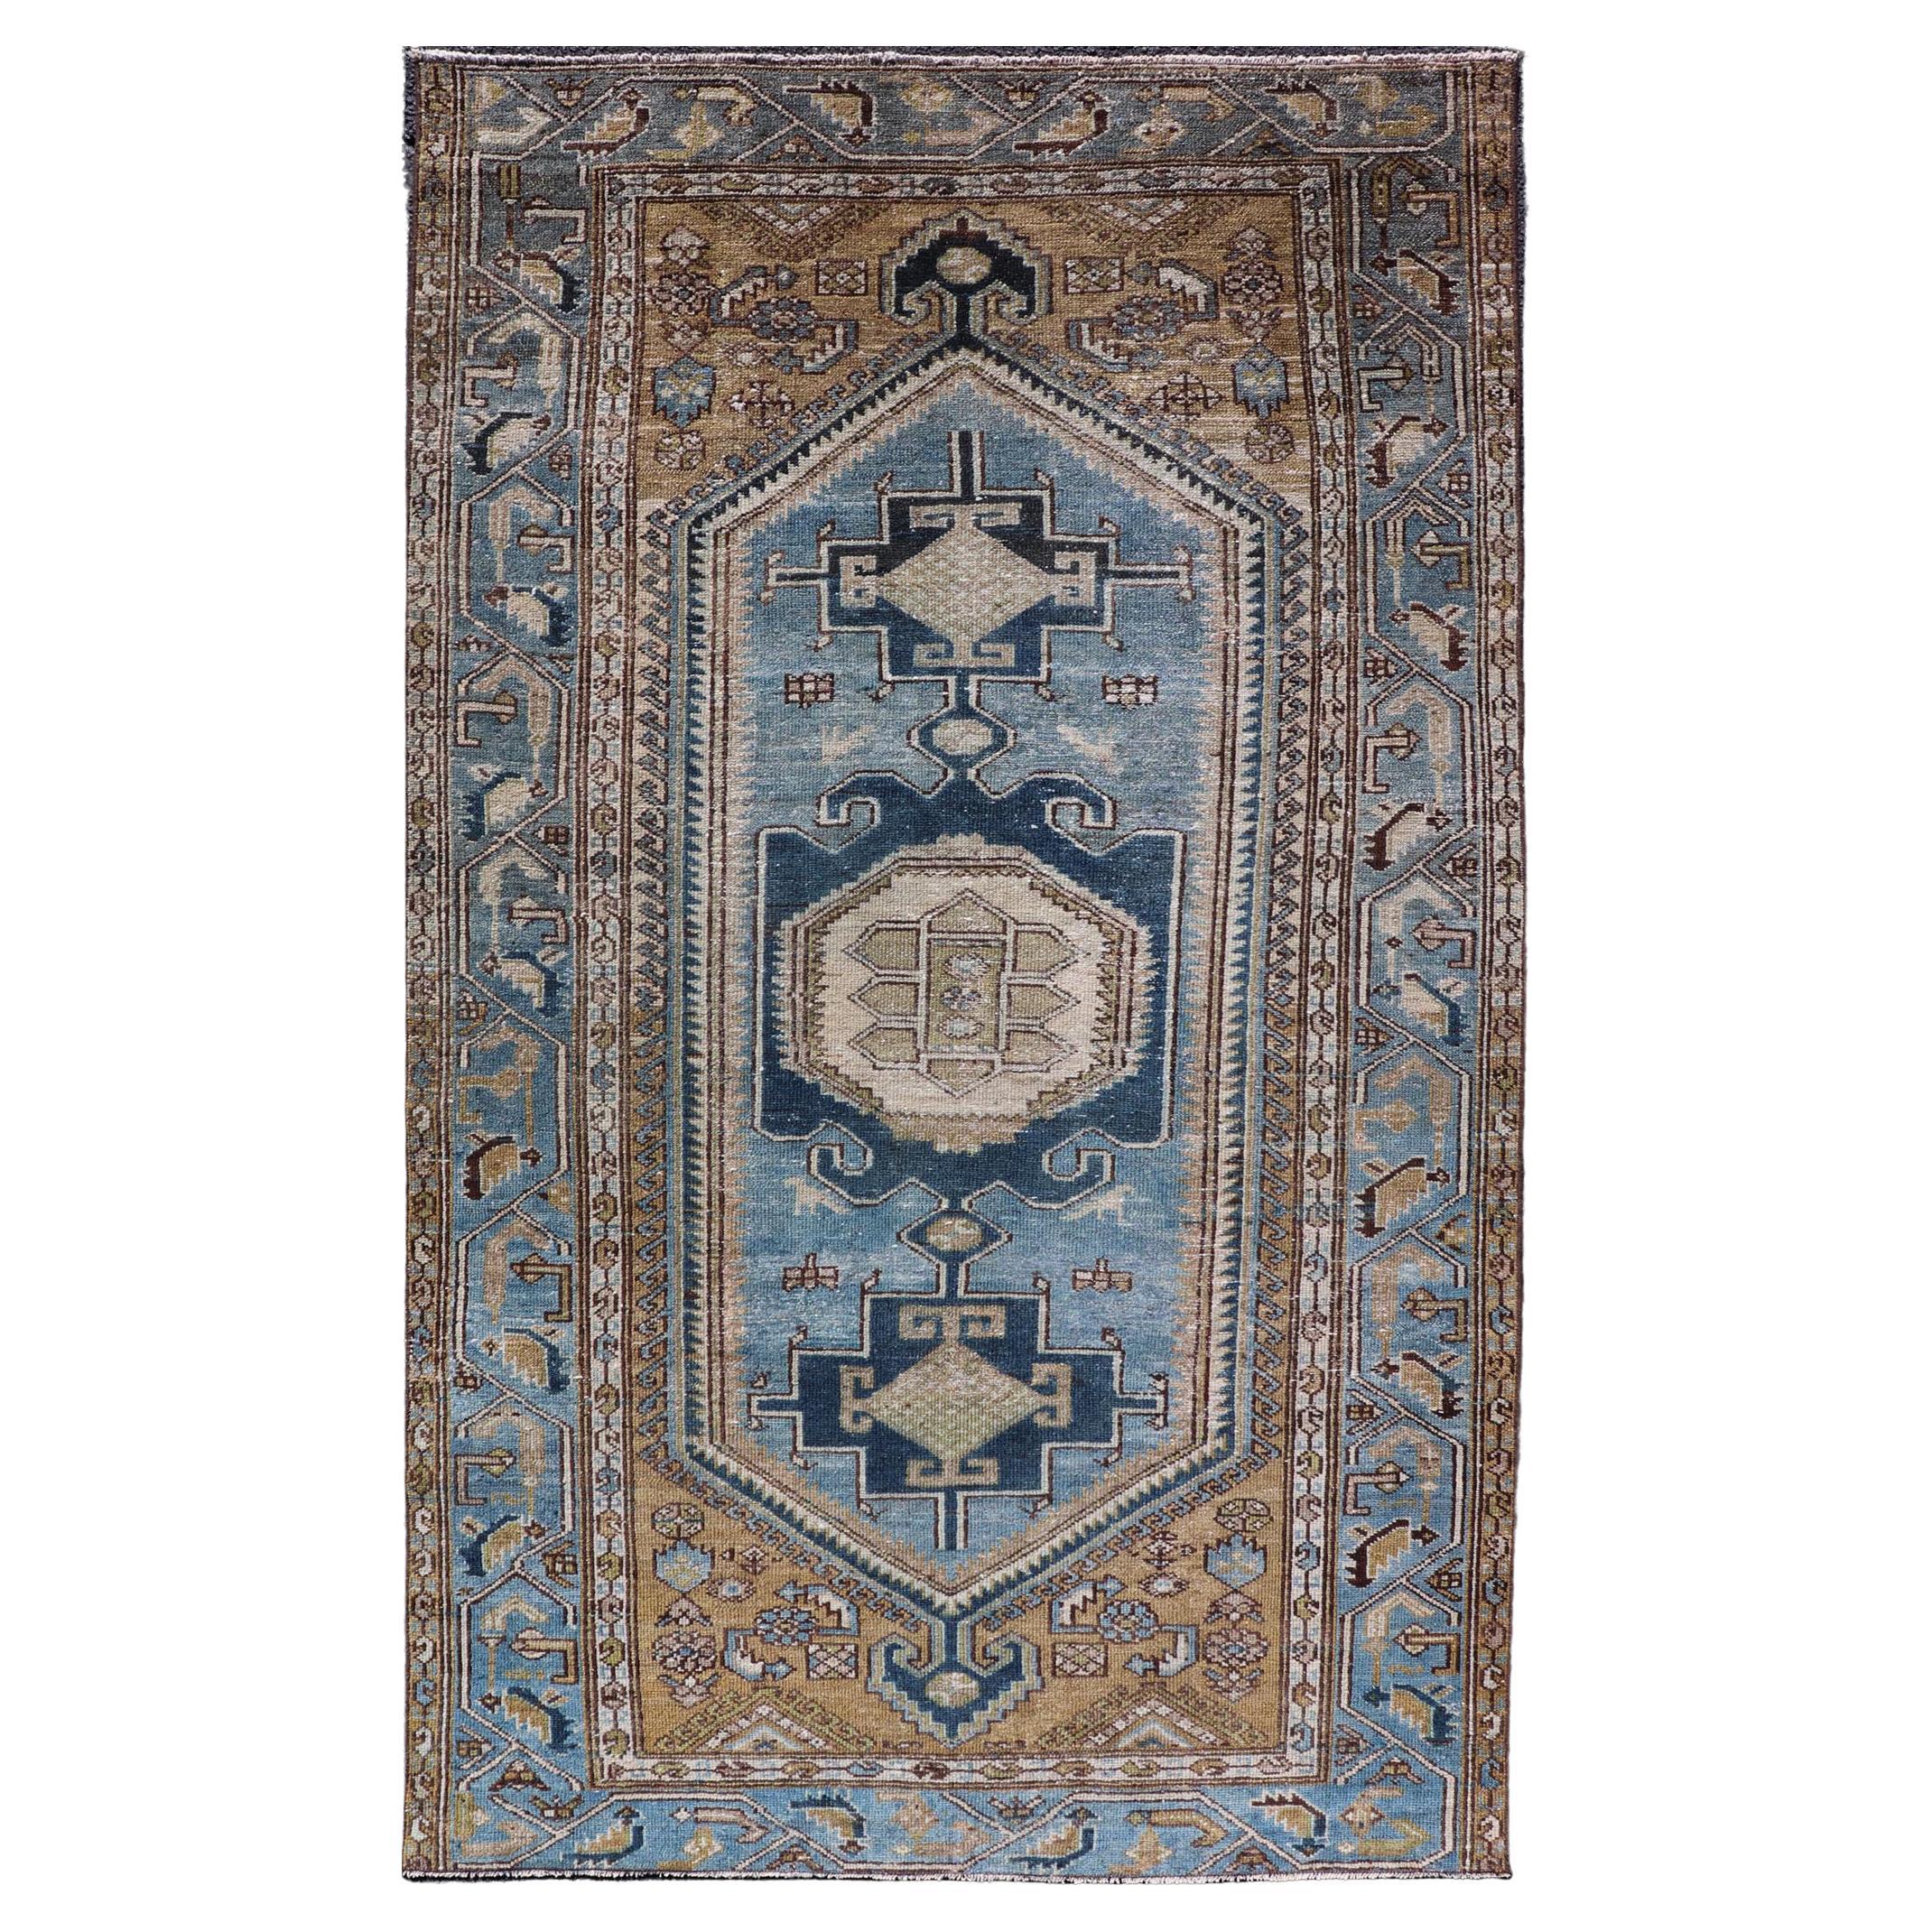 Persian Antique Malayer Rug with Geometric Design in Blue & Brown's